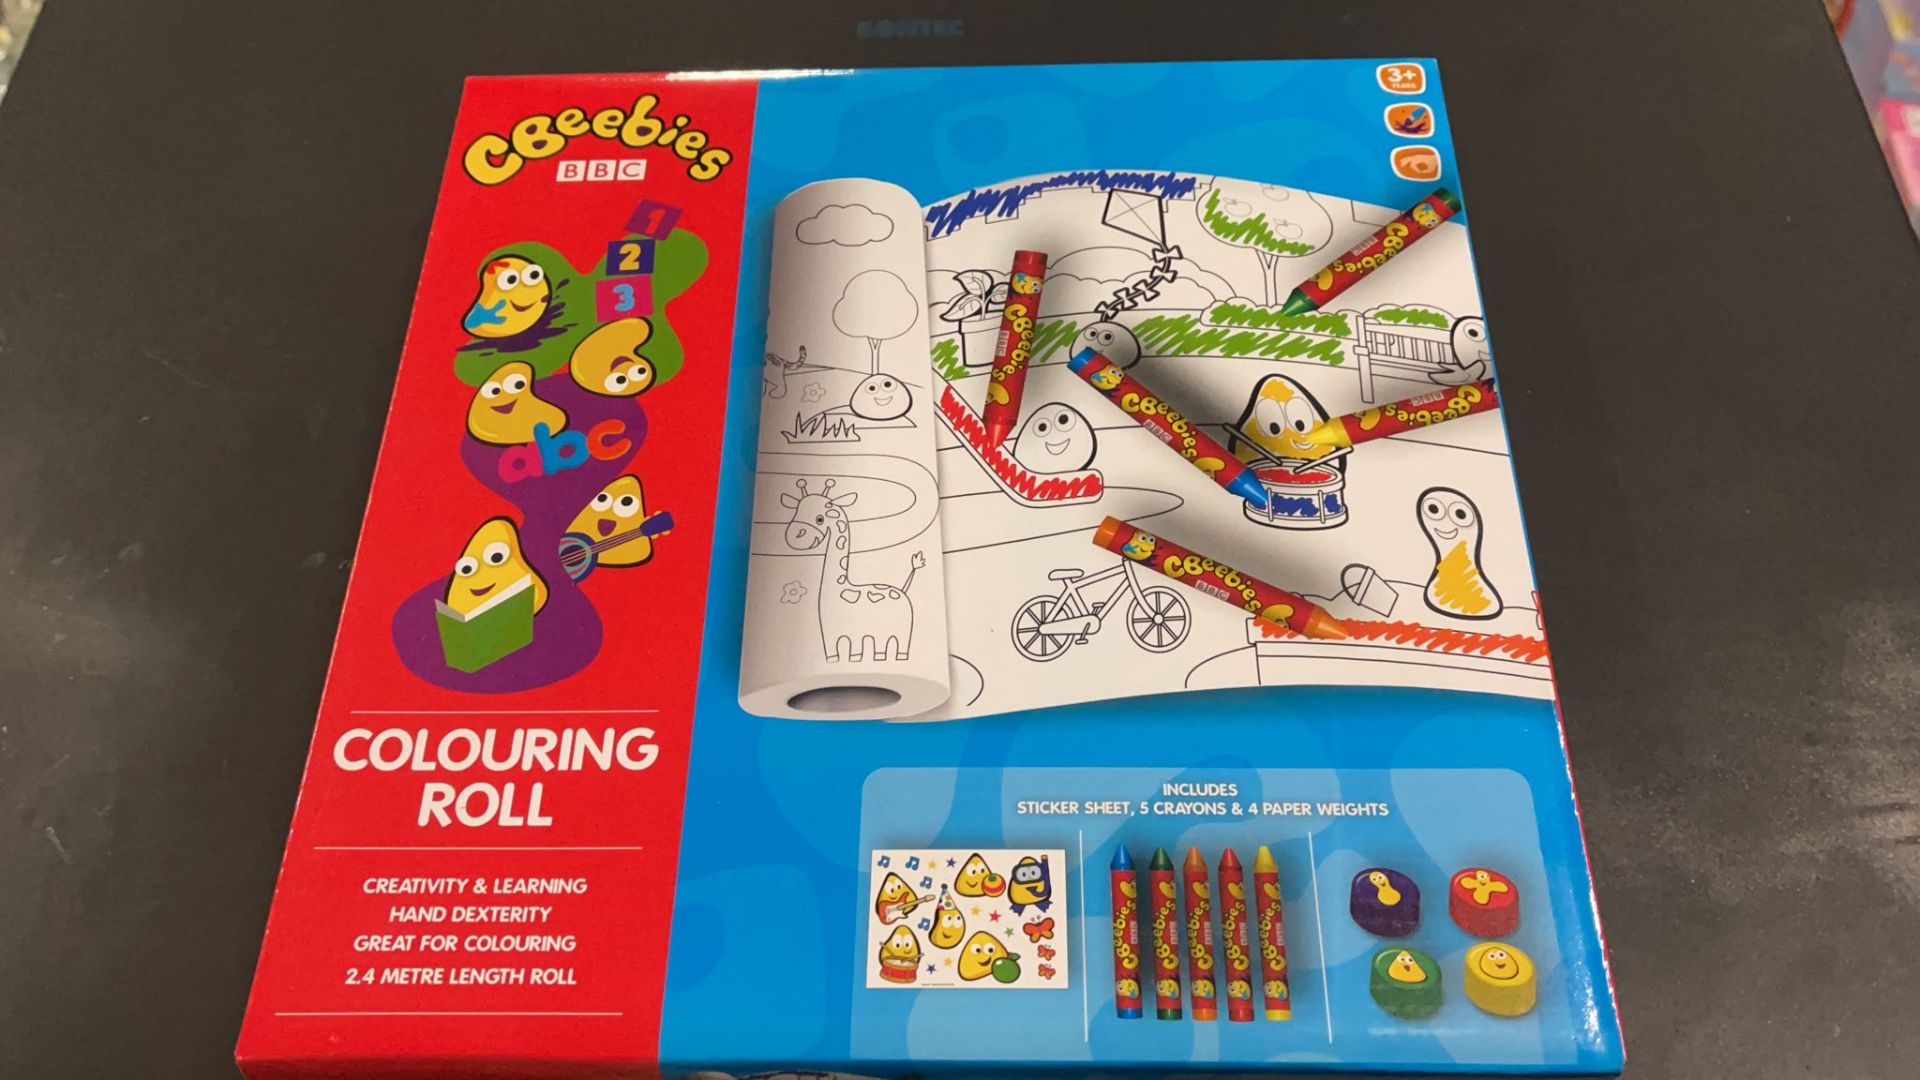 NEW CBEEBIES COLOURING ROLL WITH CRAYONS INCLUDED